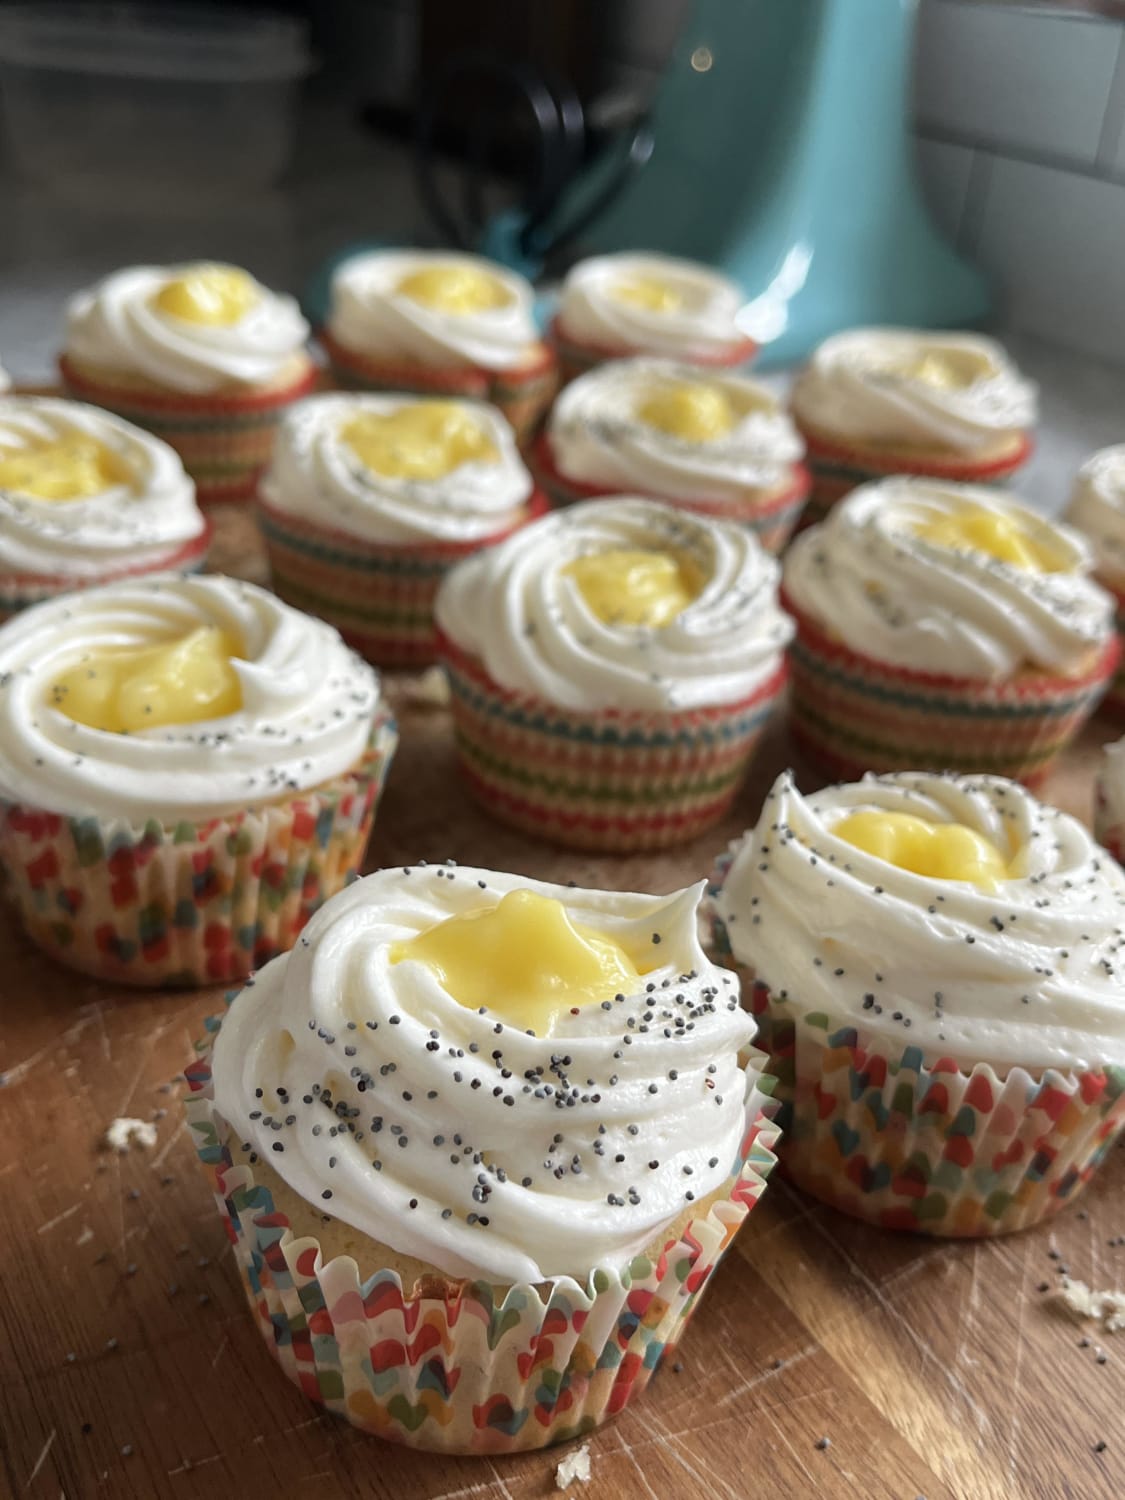 Lemon poppyseed cupcakes with lemon curd and cream cheese frosting!